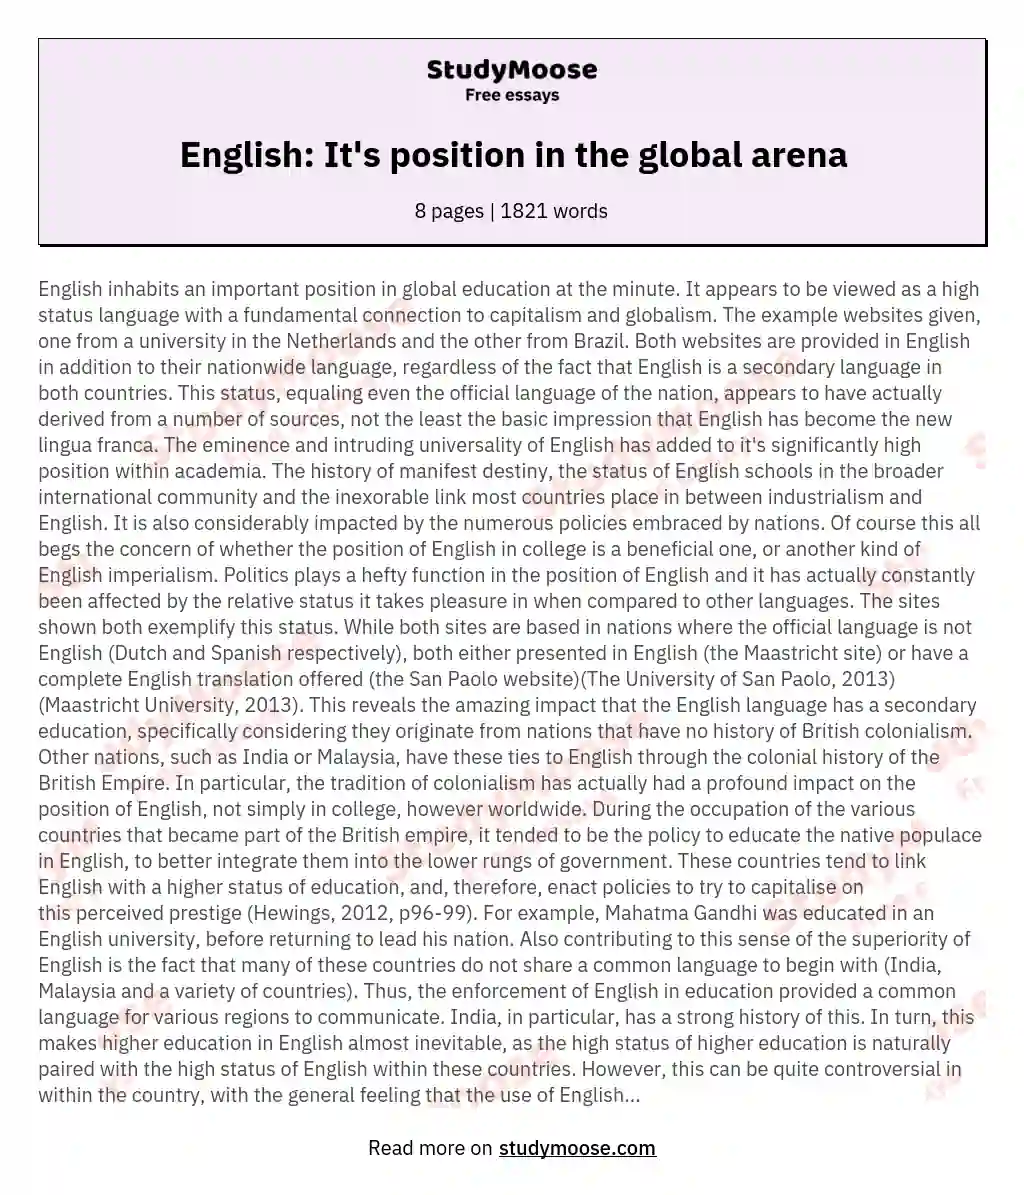 English: It's position in the global arena essay